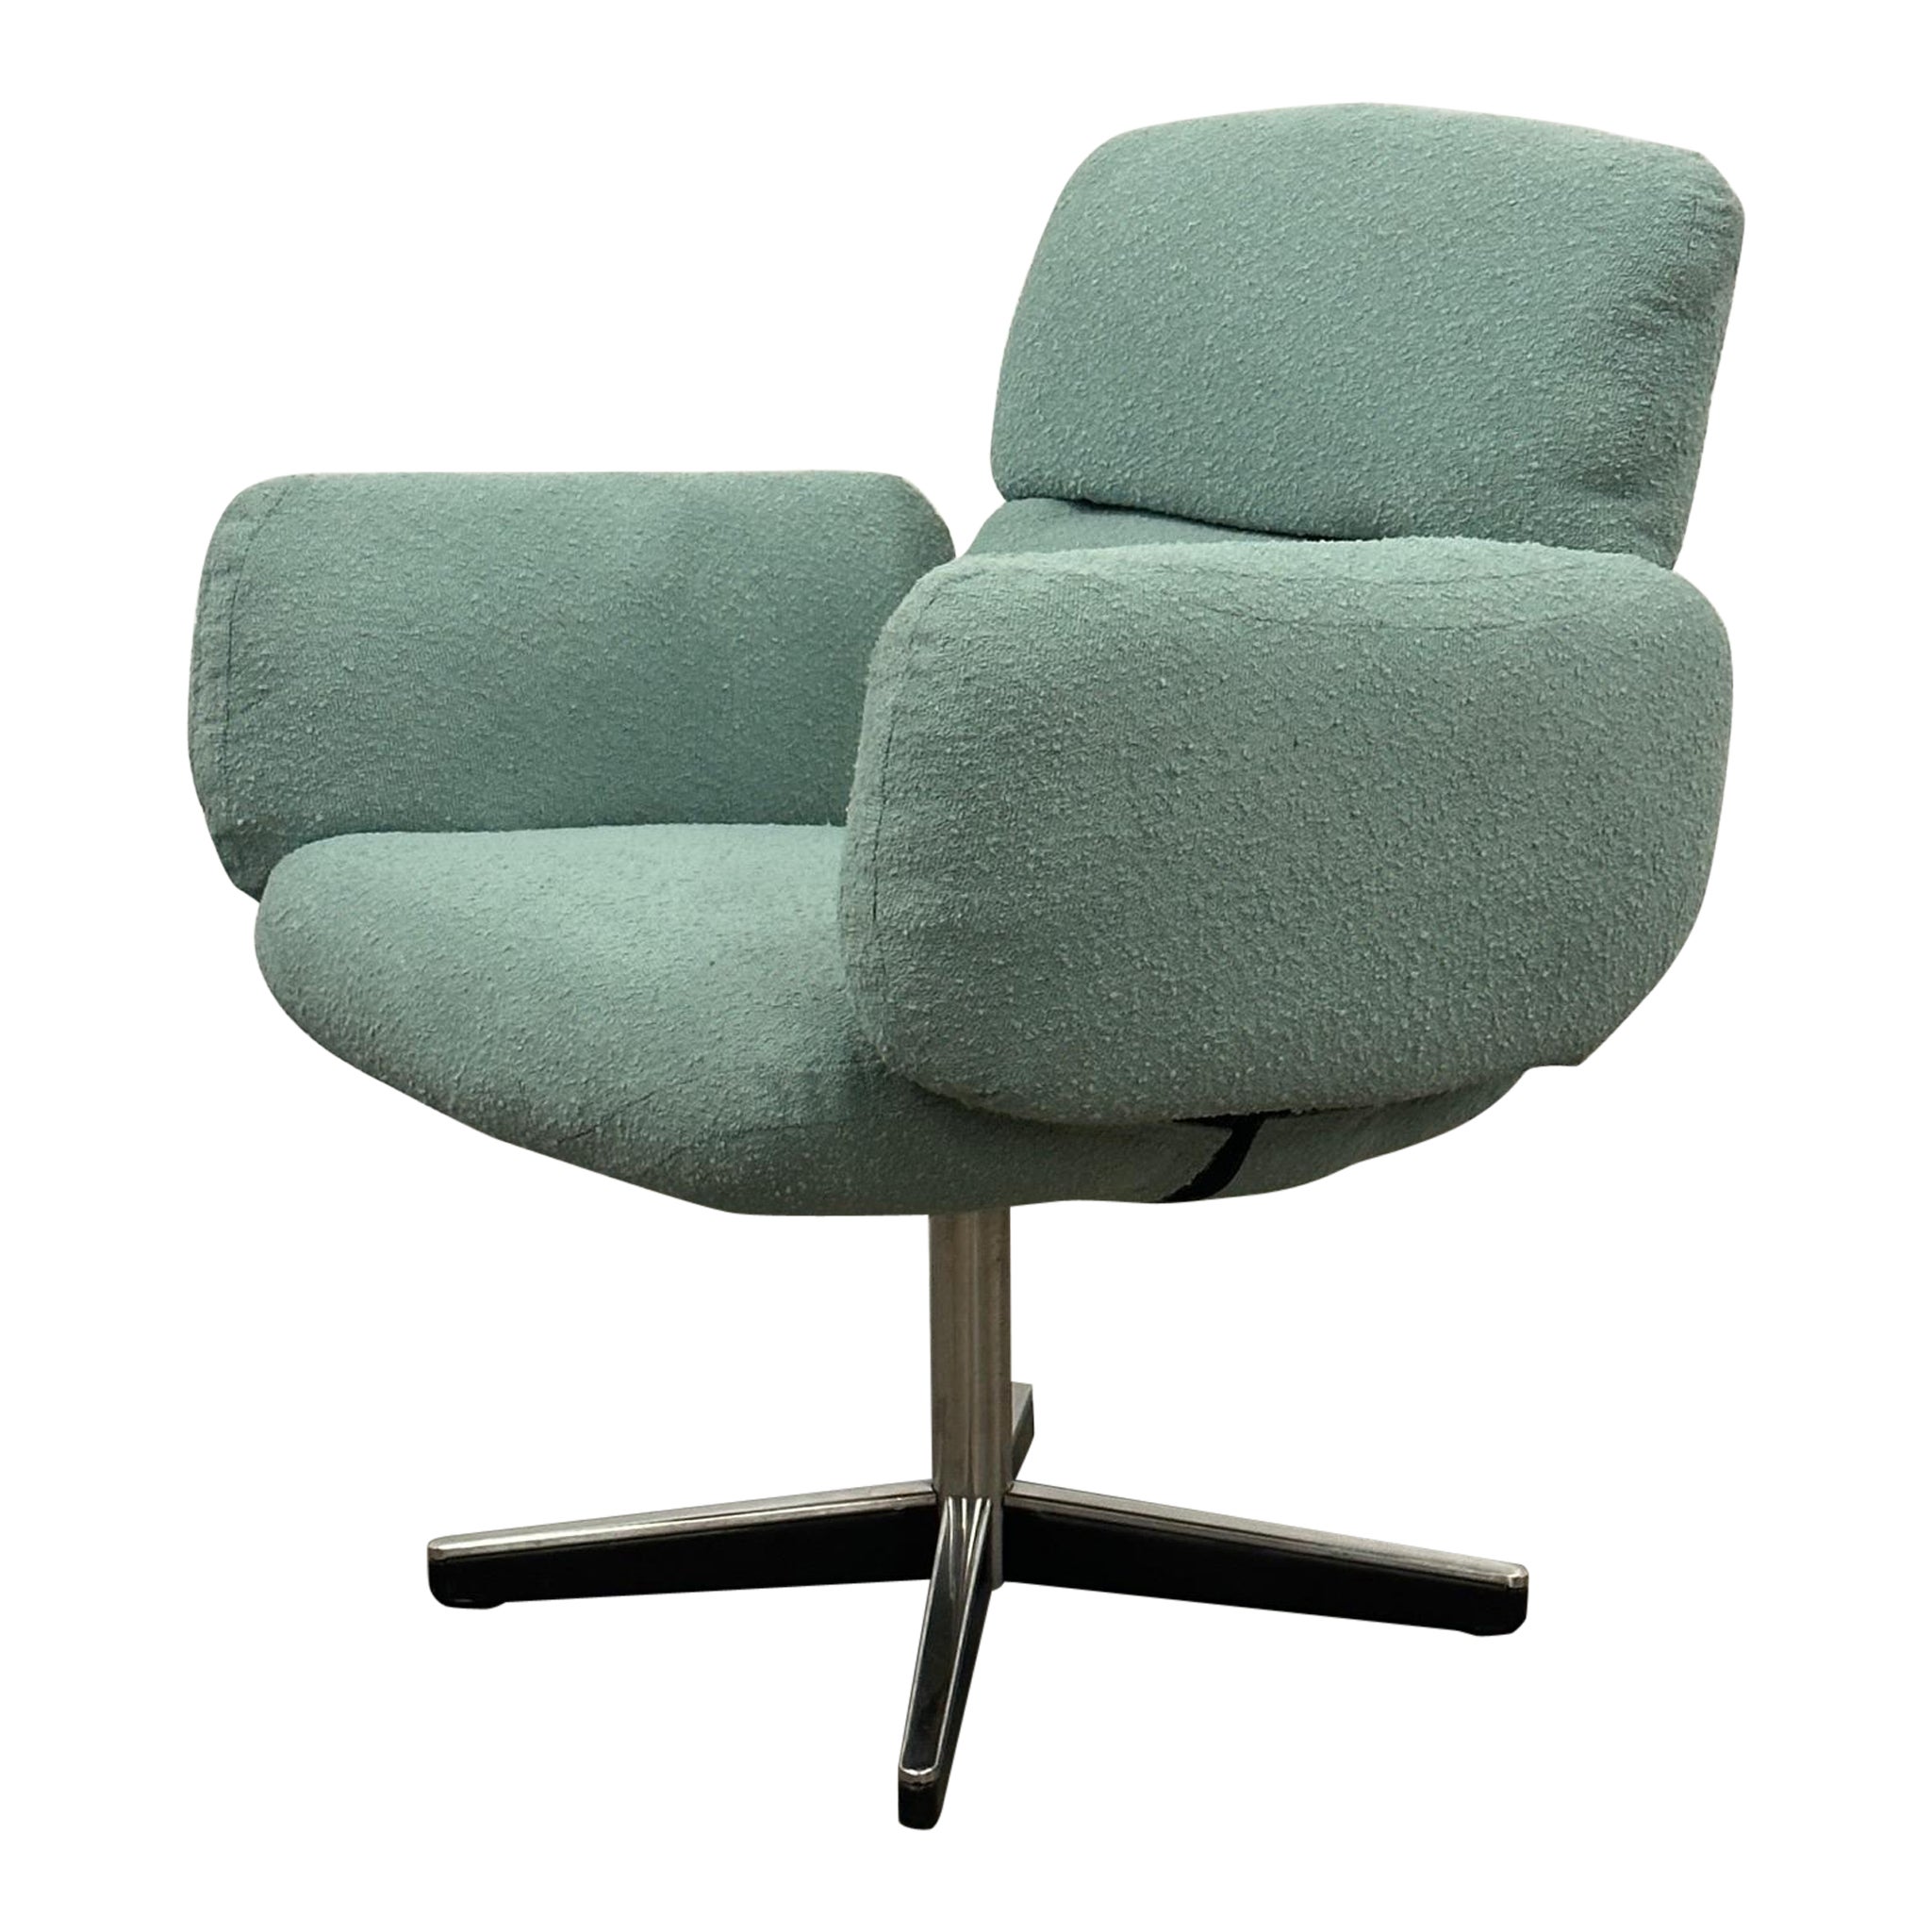 Executive Low Back Office Chair by Otto Zapf for Knoll